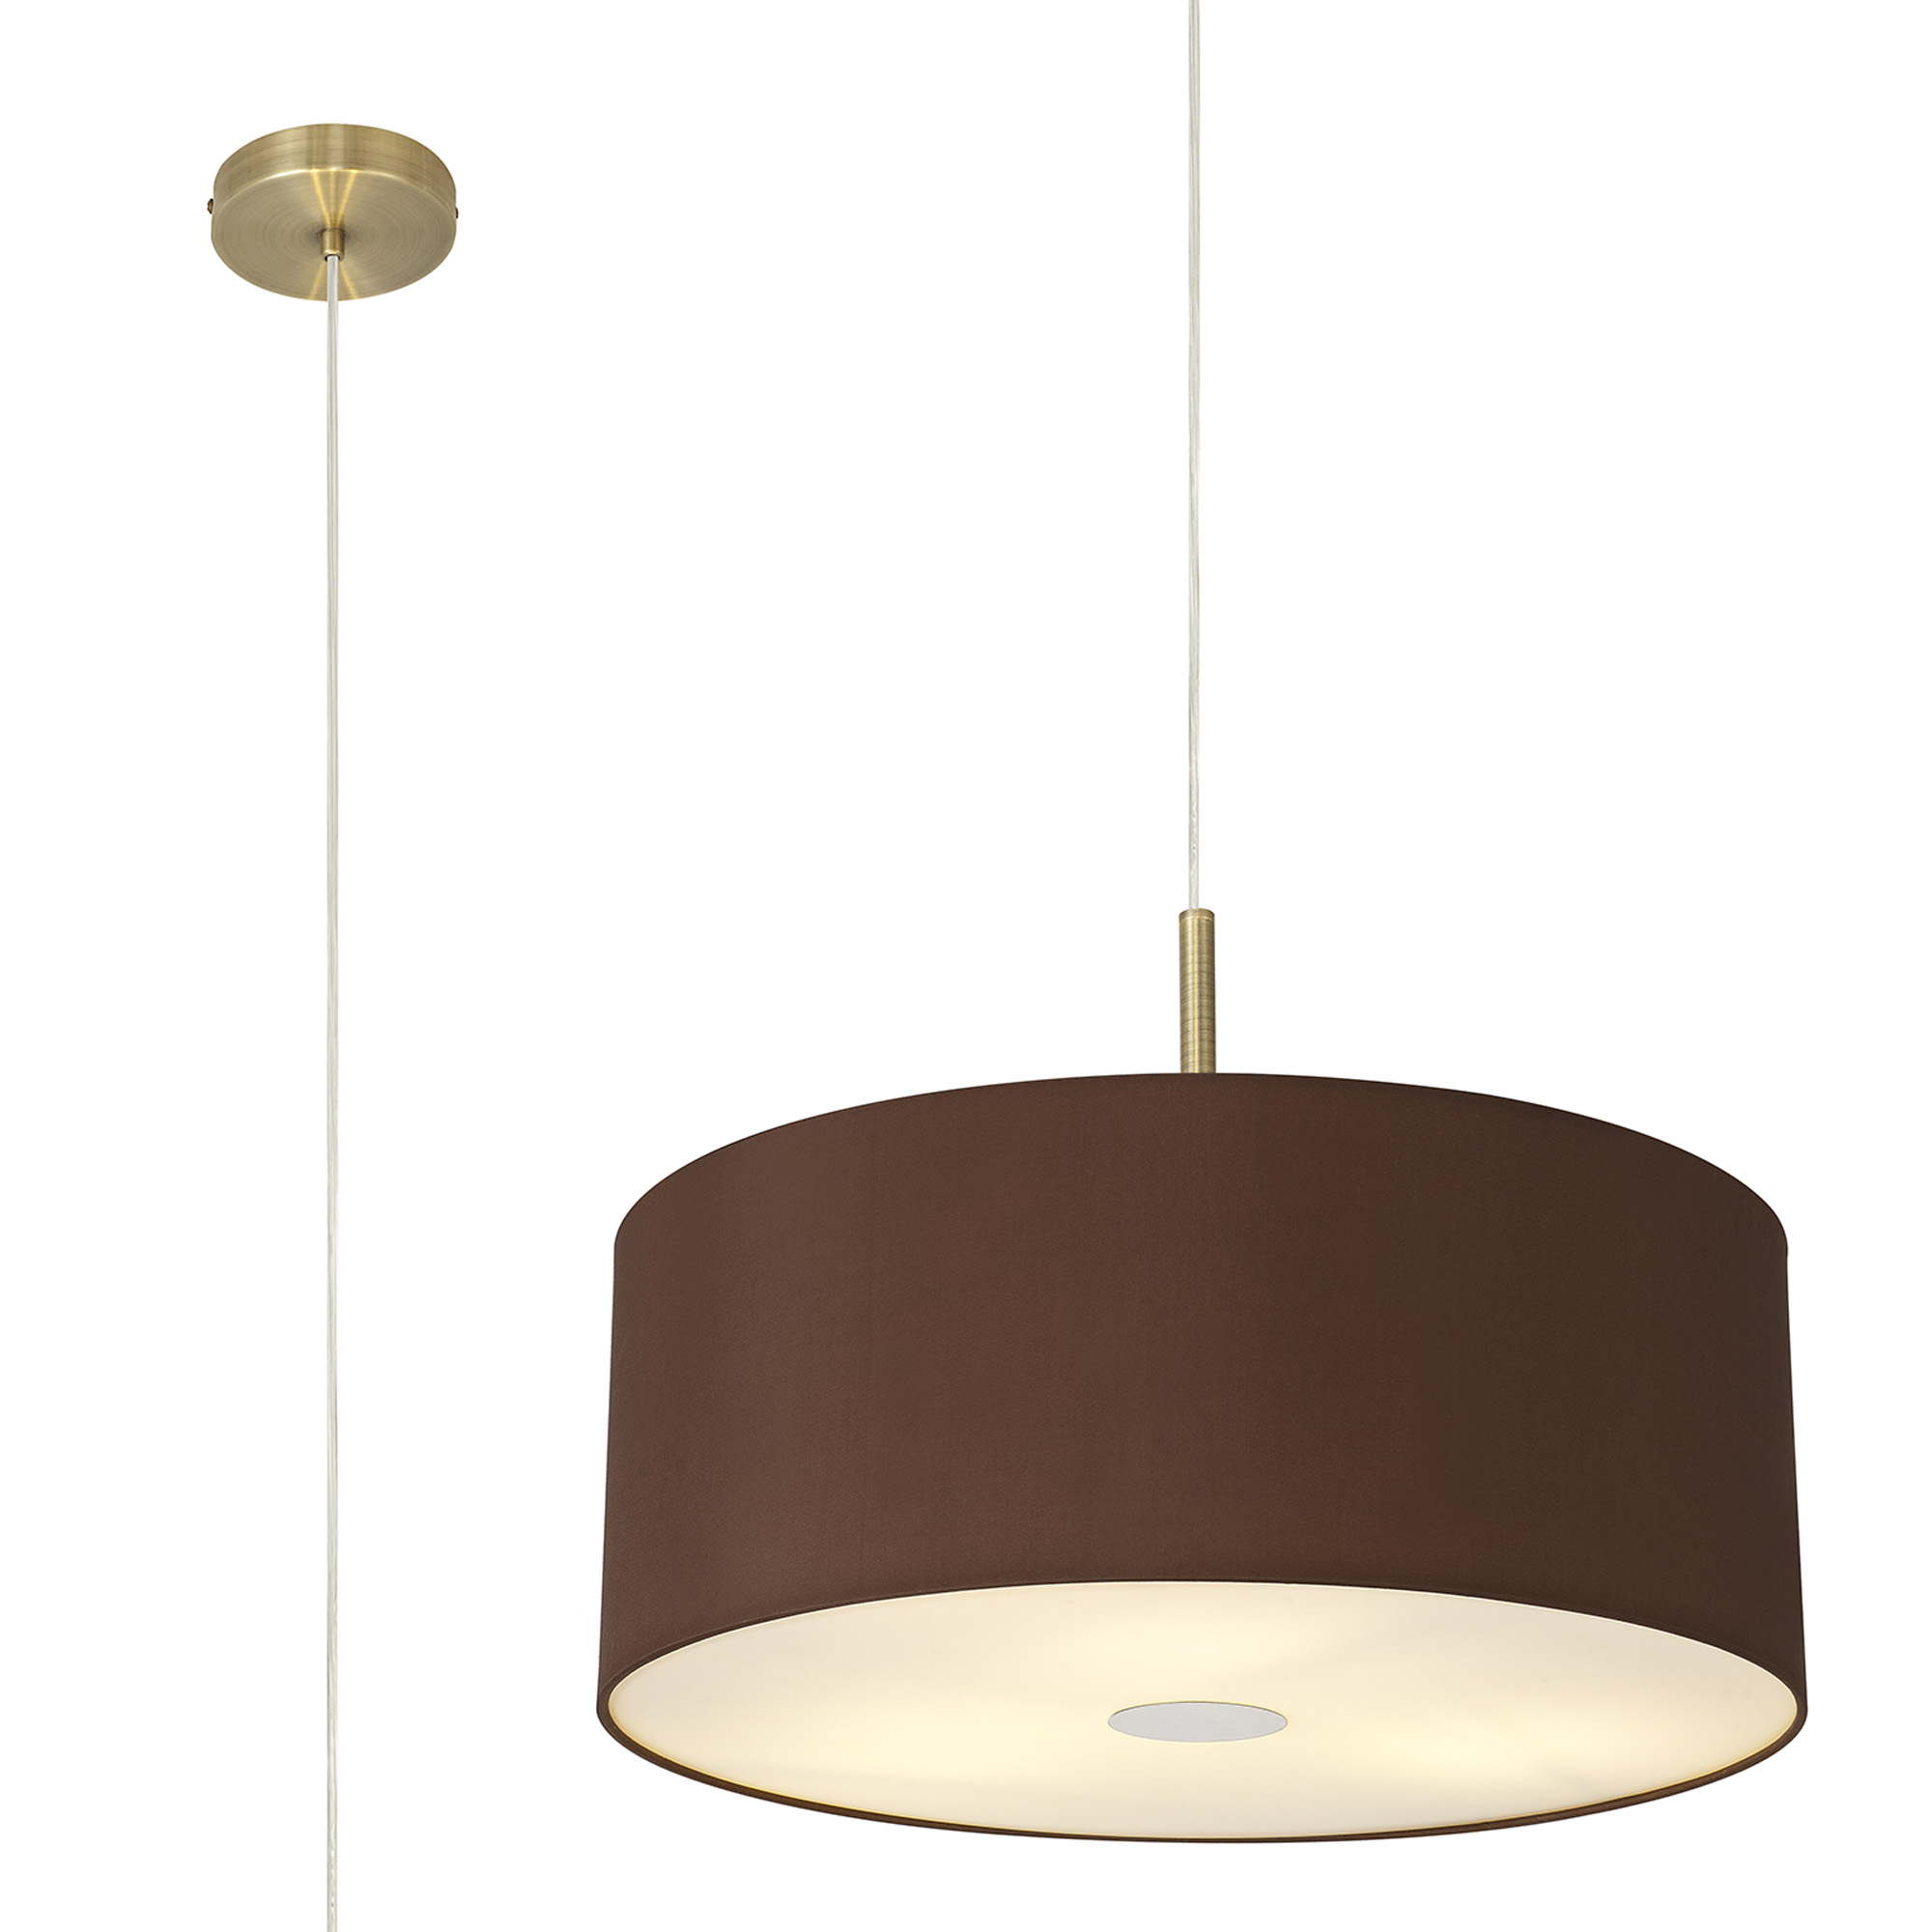 DK0406  Baymont 50cm 3 Light Pendant Antique Brass, Raw Cocoa/Grecian Bronze, Frosted Diffuser